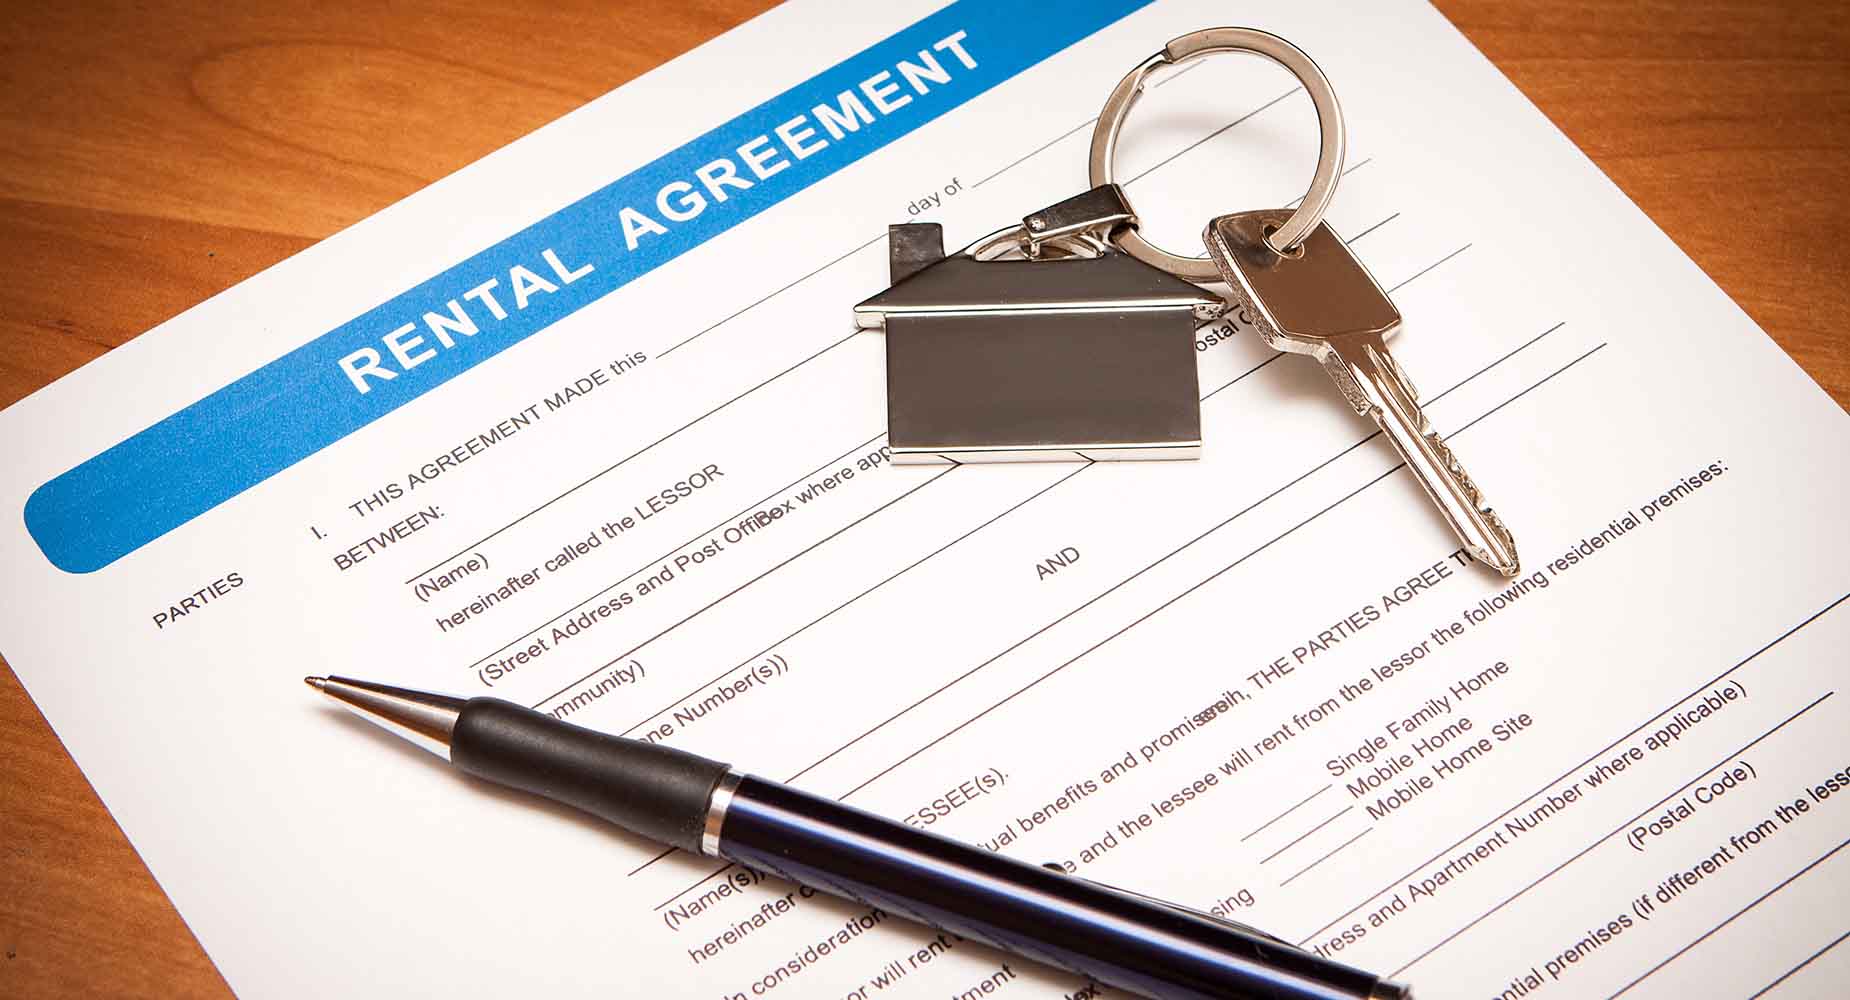 rent-lease-property-house-agreement-tenant-agent-landlord-contract.jpg